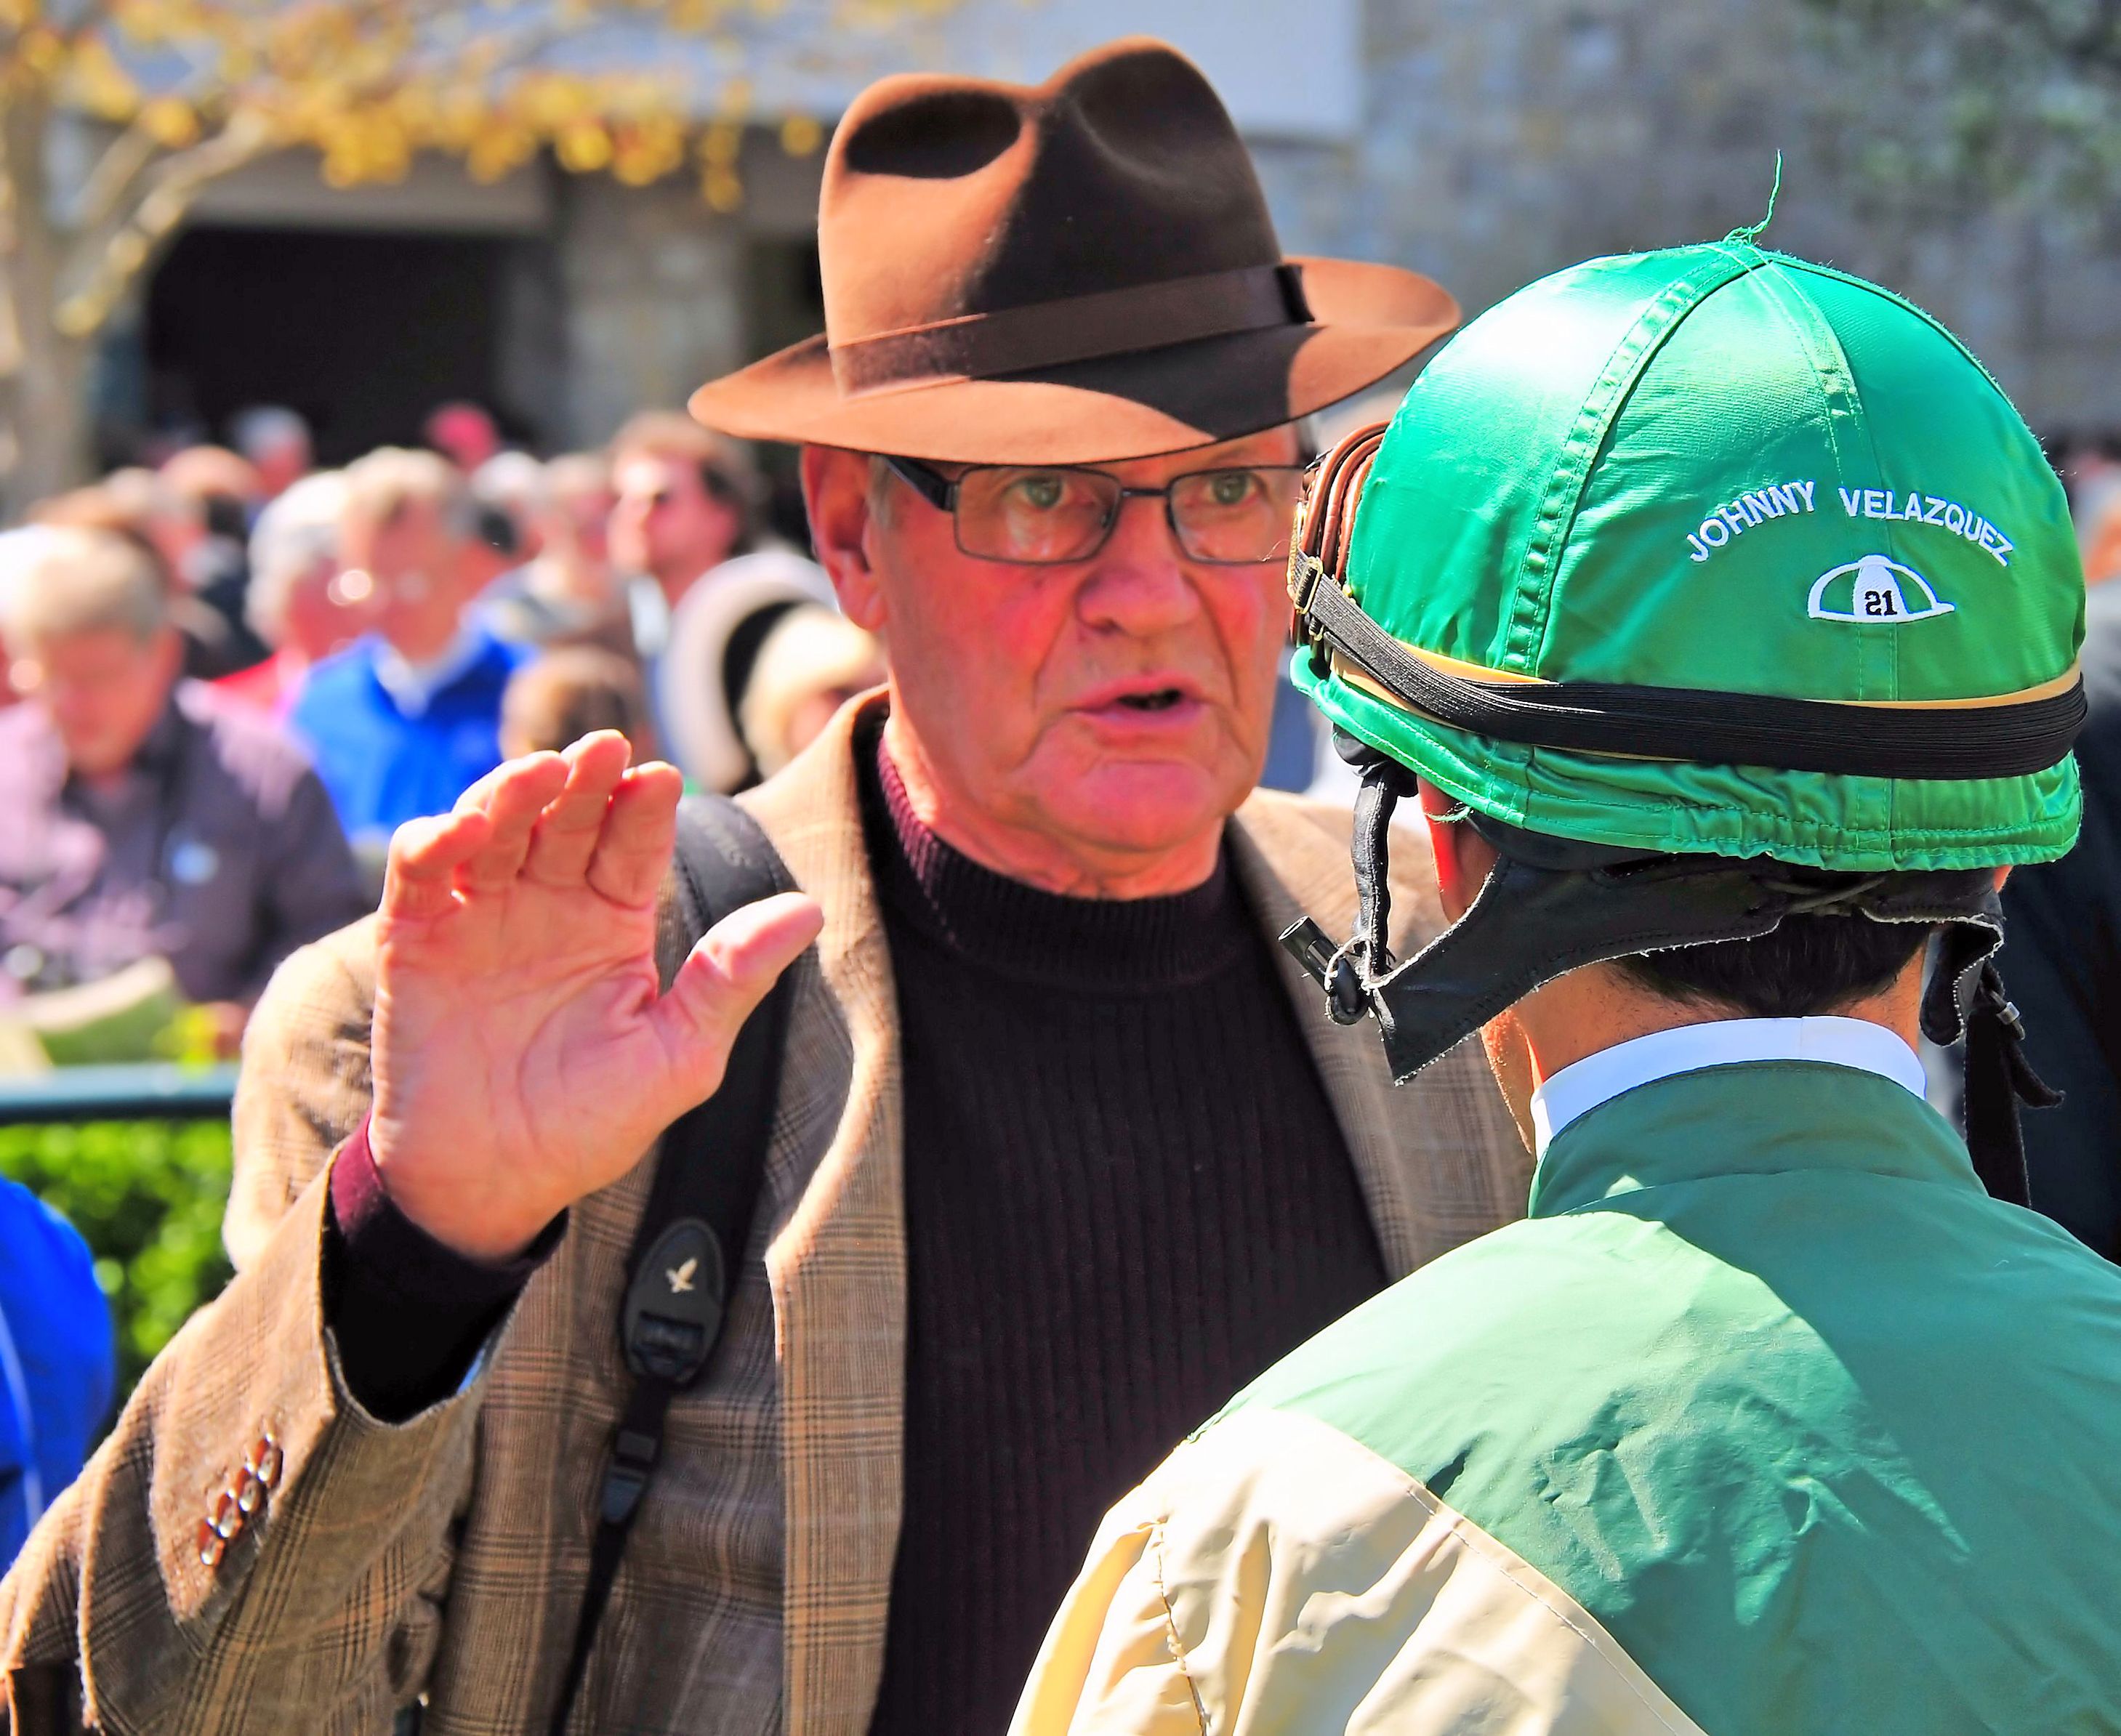 Roger Attfield and John Velazquez in the paddock at Keeneland, April 2014 (Brien Bouyea)